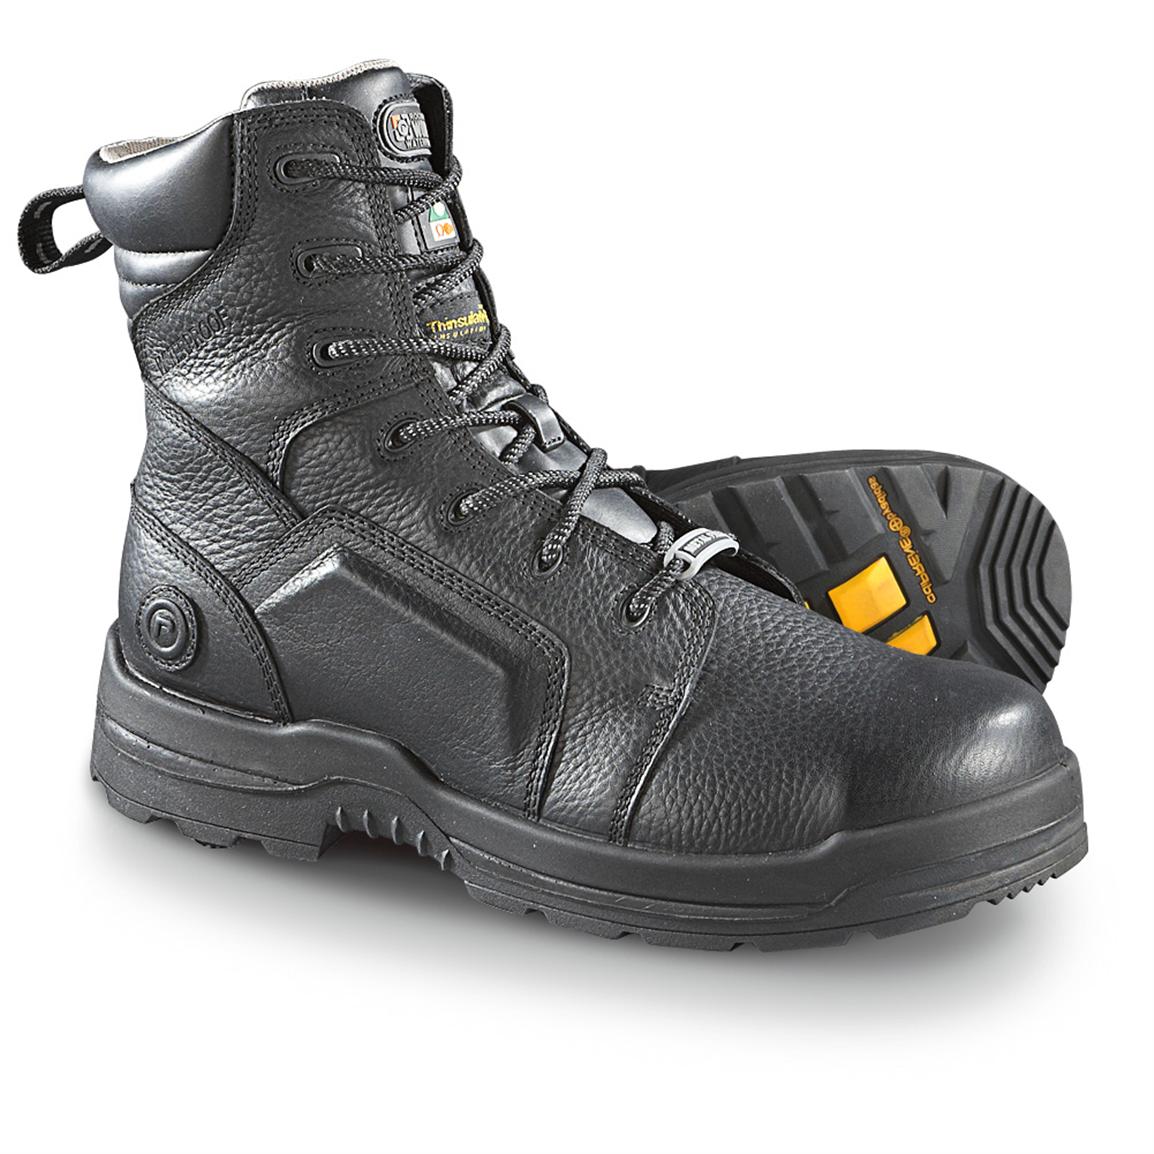 rockport insulated boots